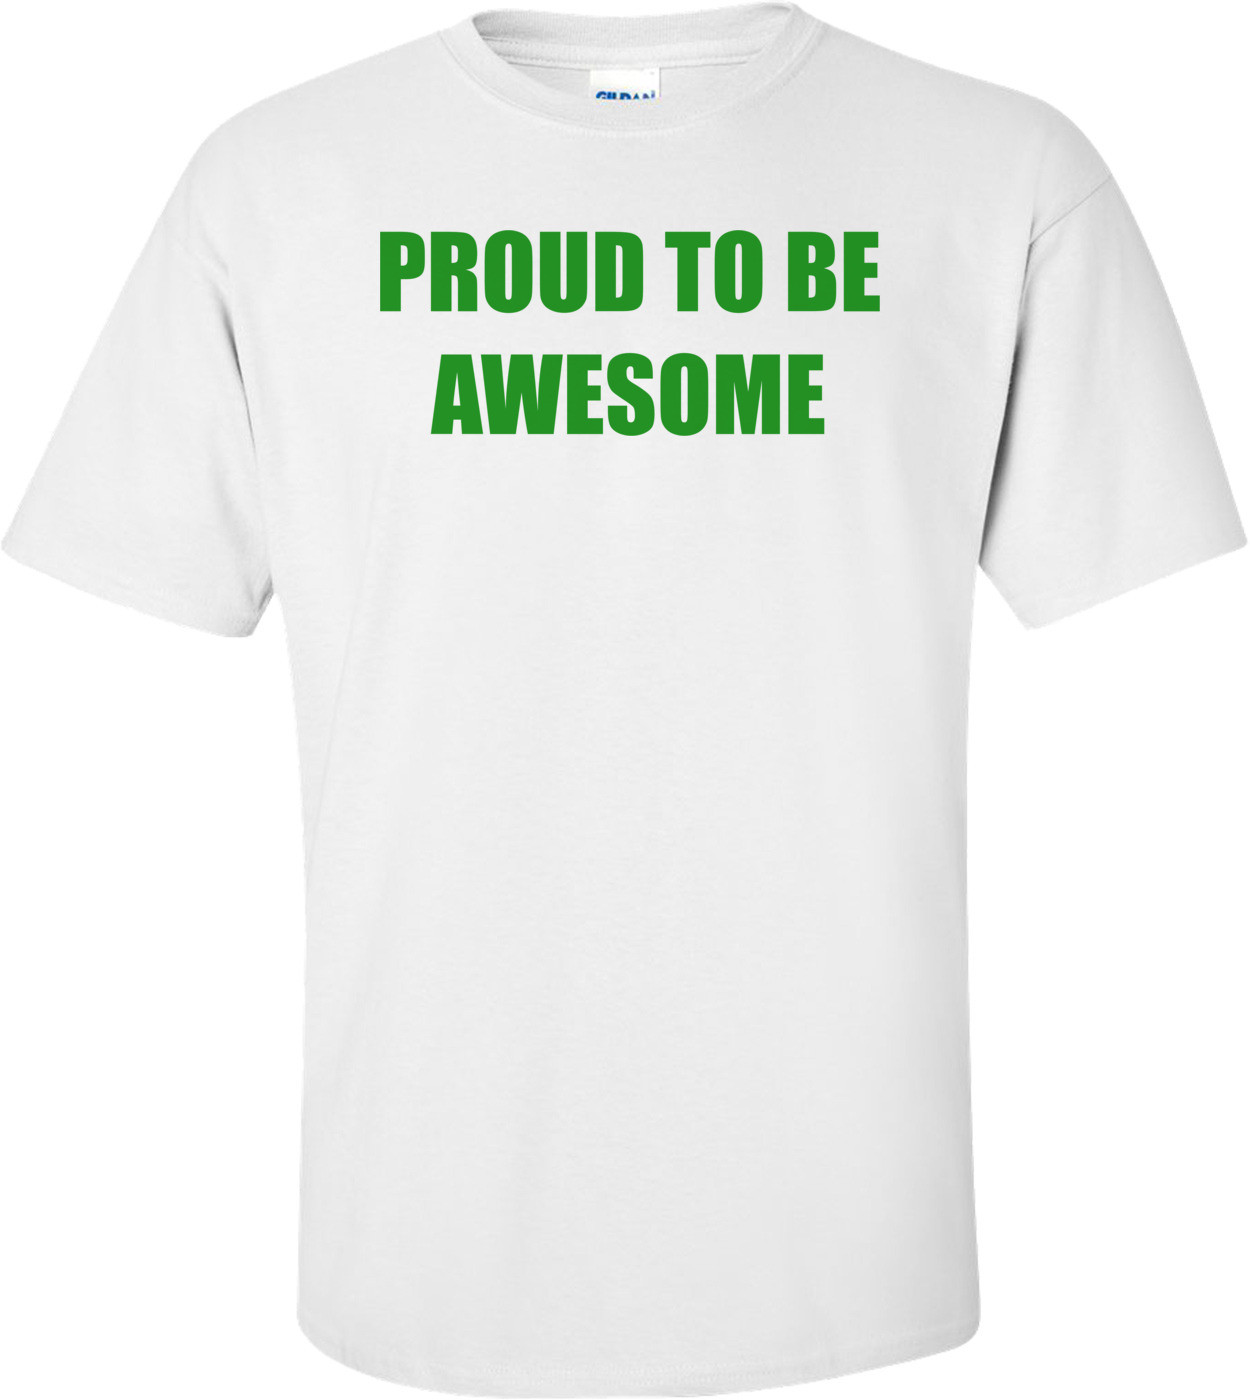 PROUD TO BE AWESOME